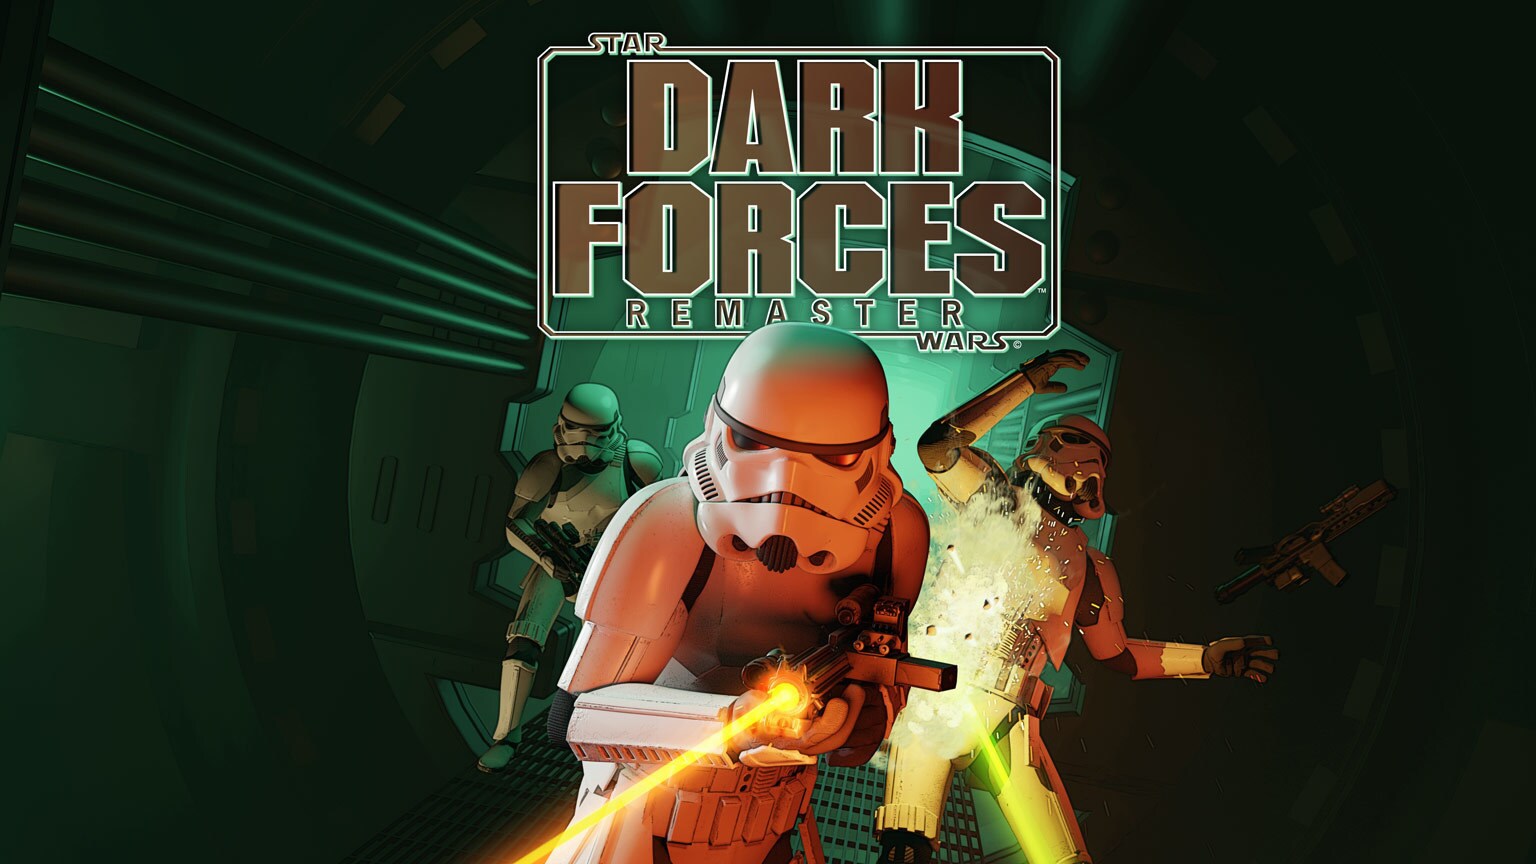 Dark Forces Remaster key art featuring logo and stormtroopers in battle.